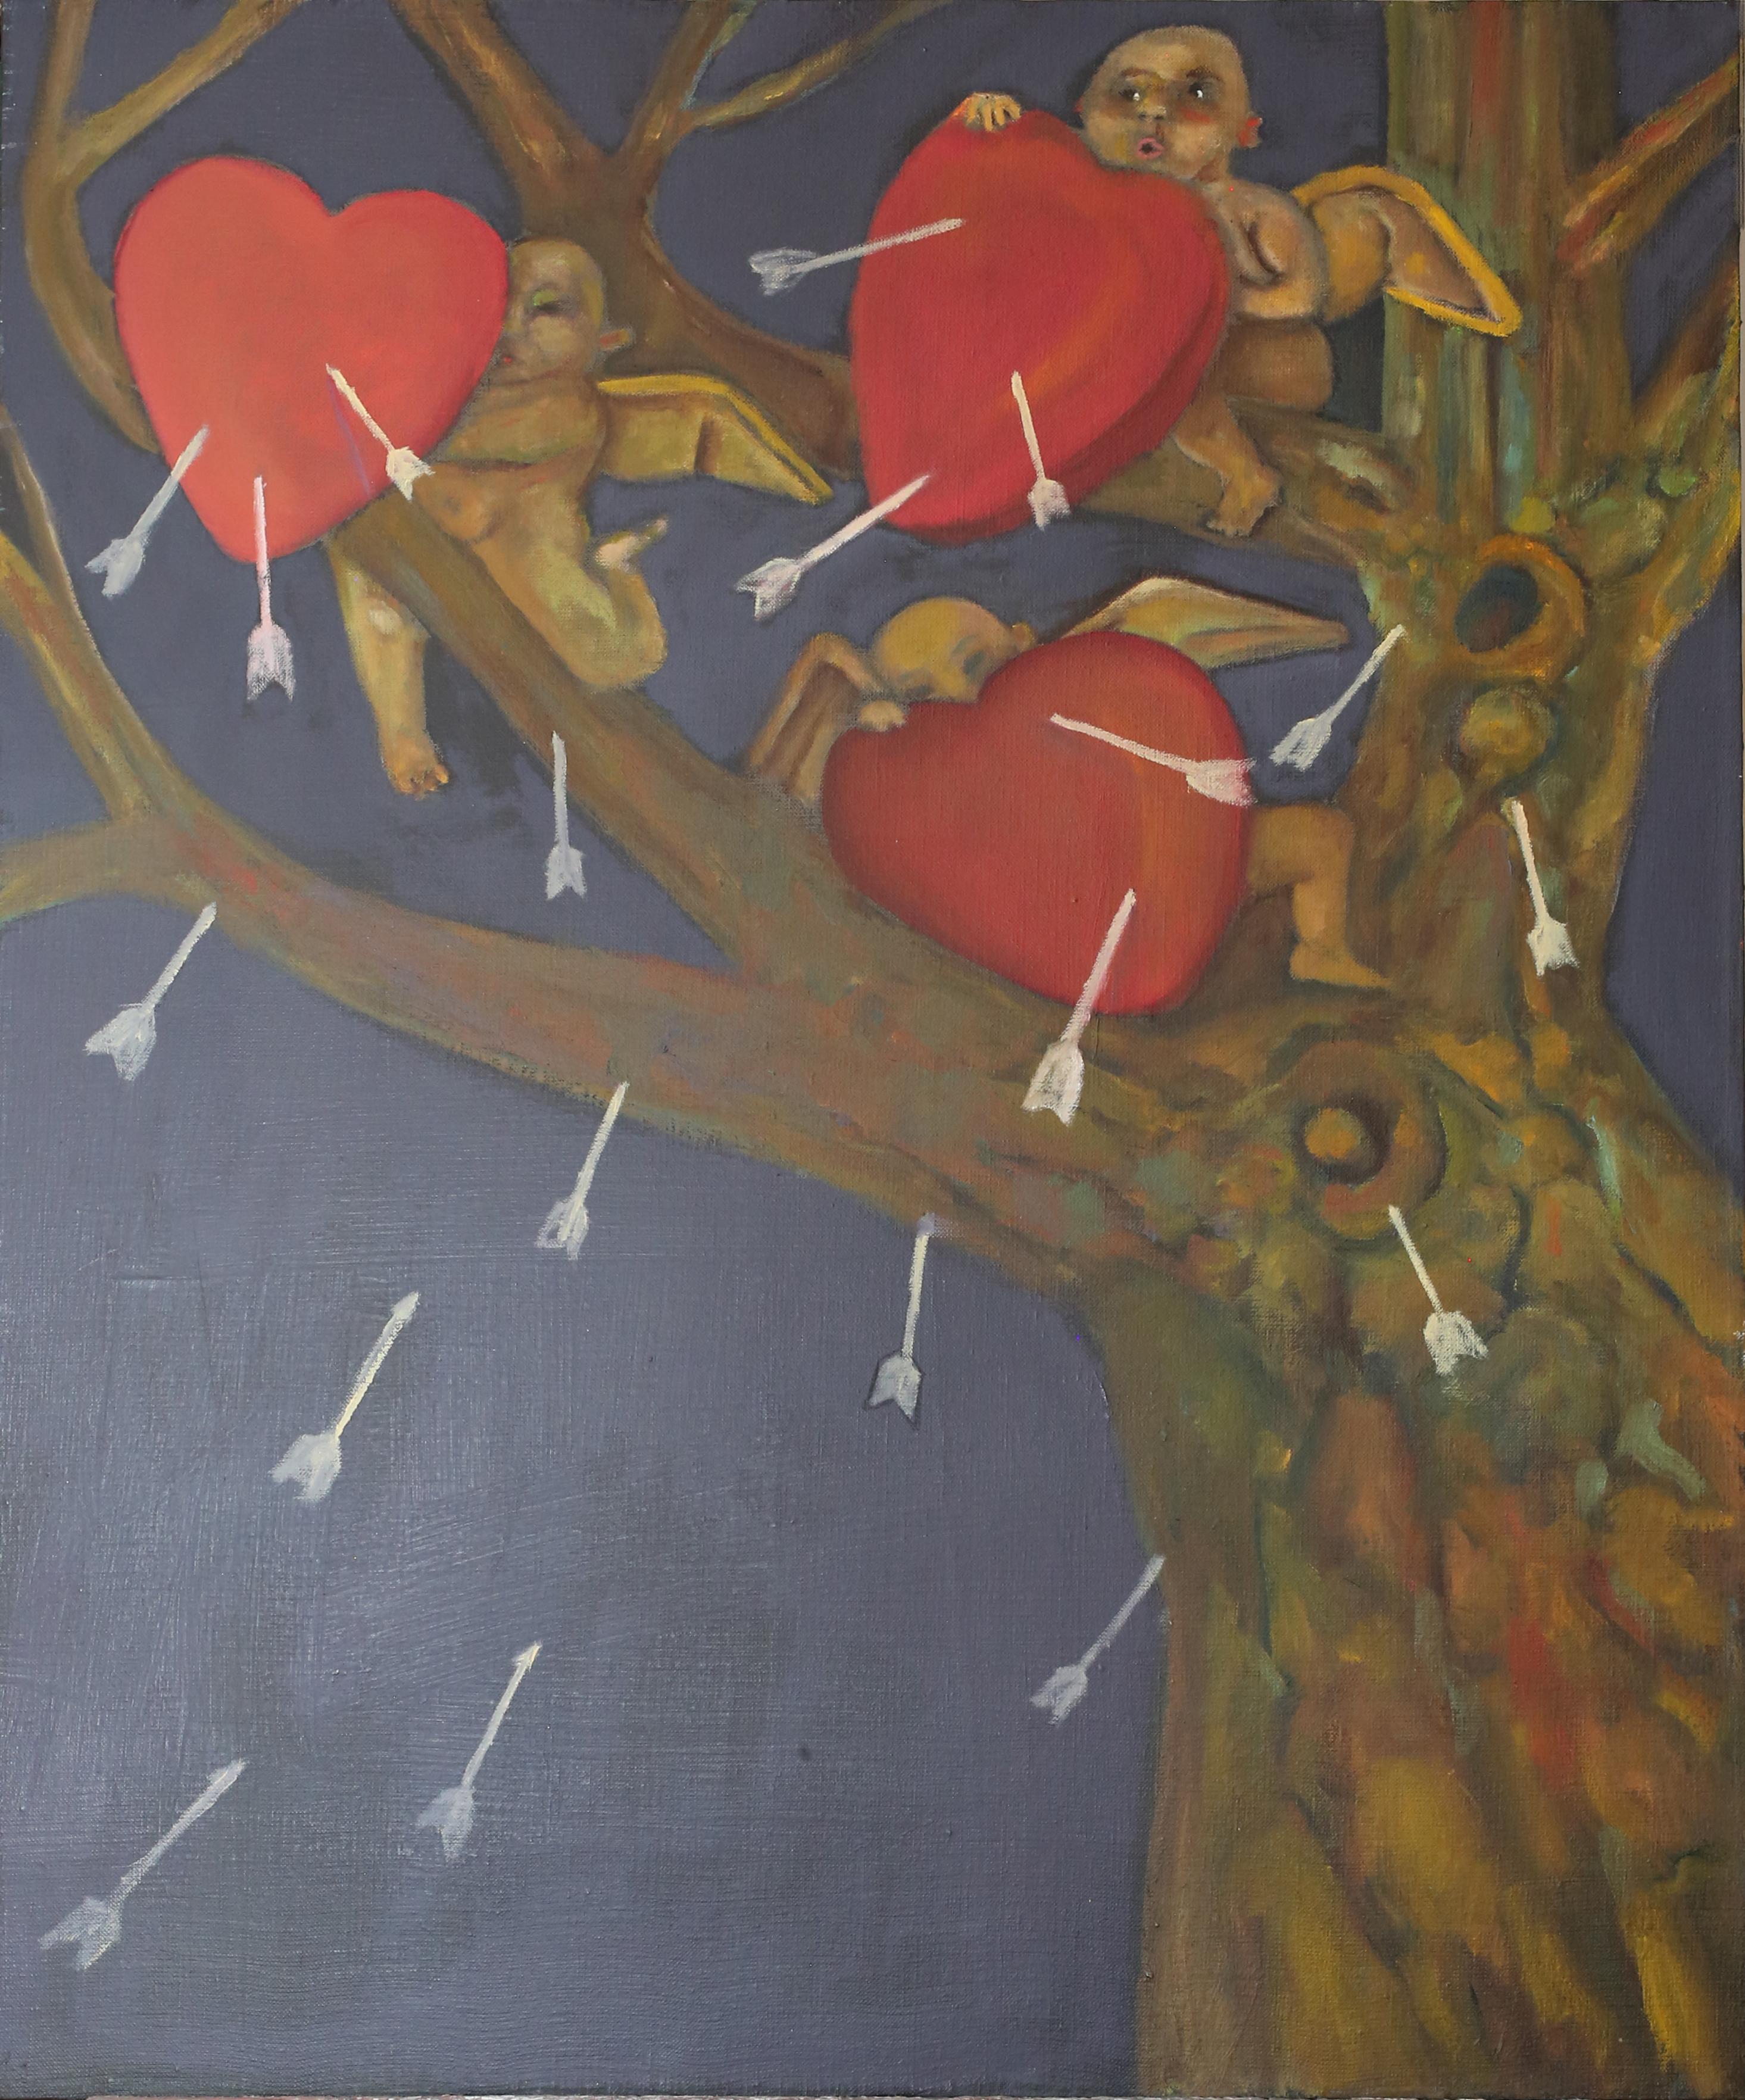 Stephen Basso Figurative Painting - Slings and Arrows, cupids hearts night forest love valentine battle theme